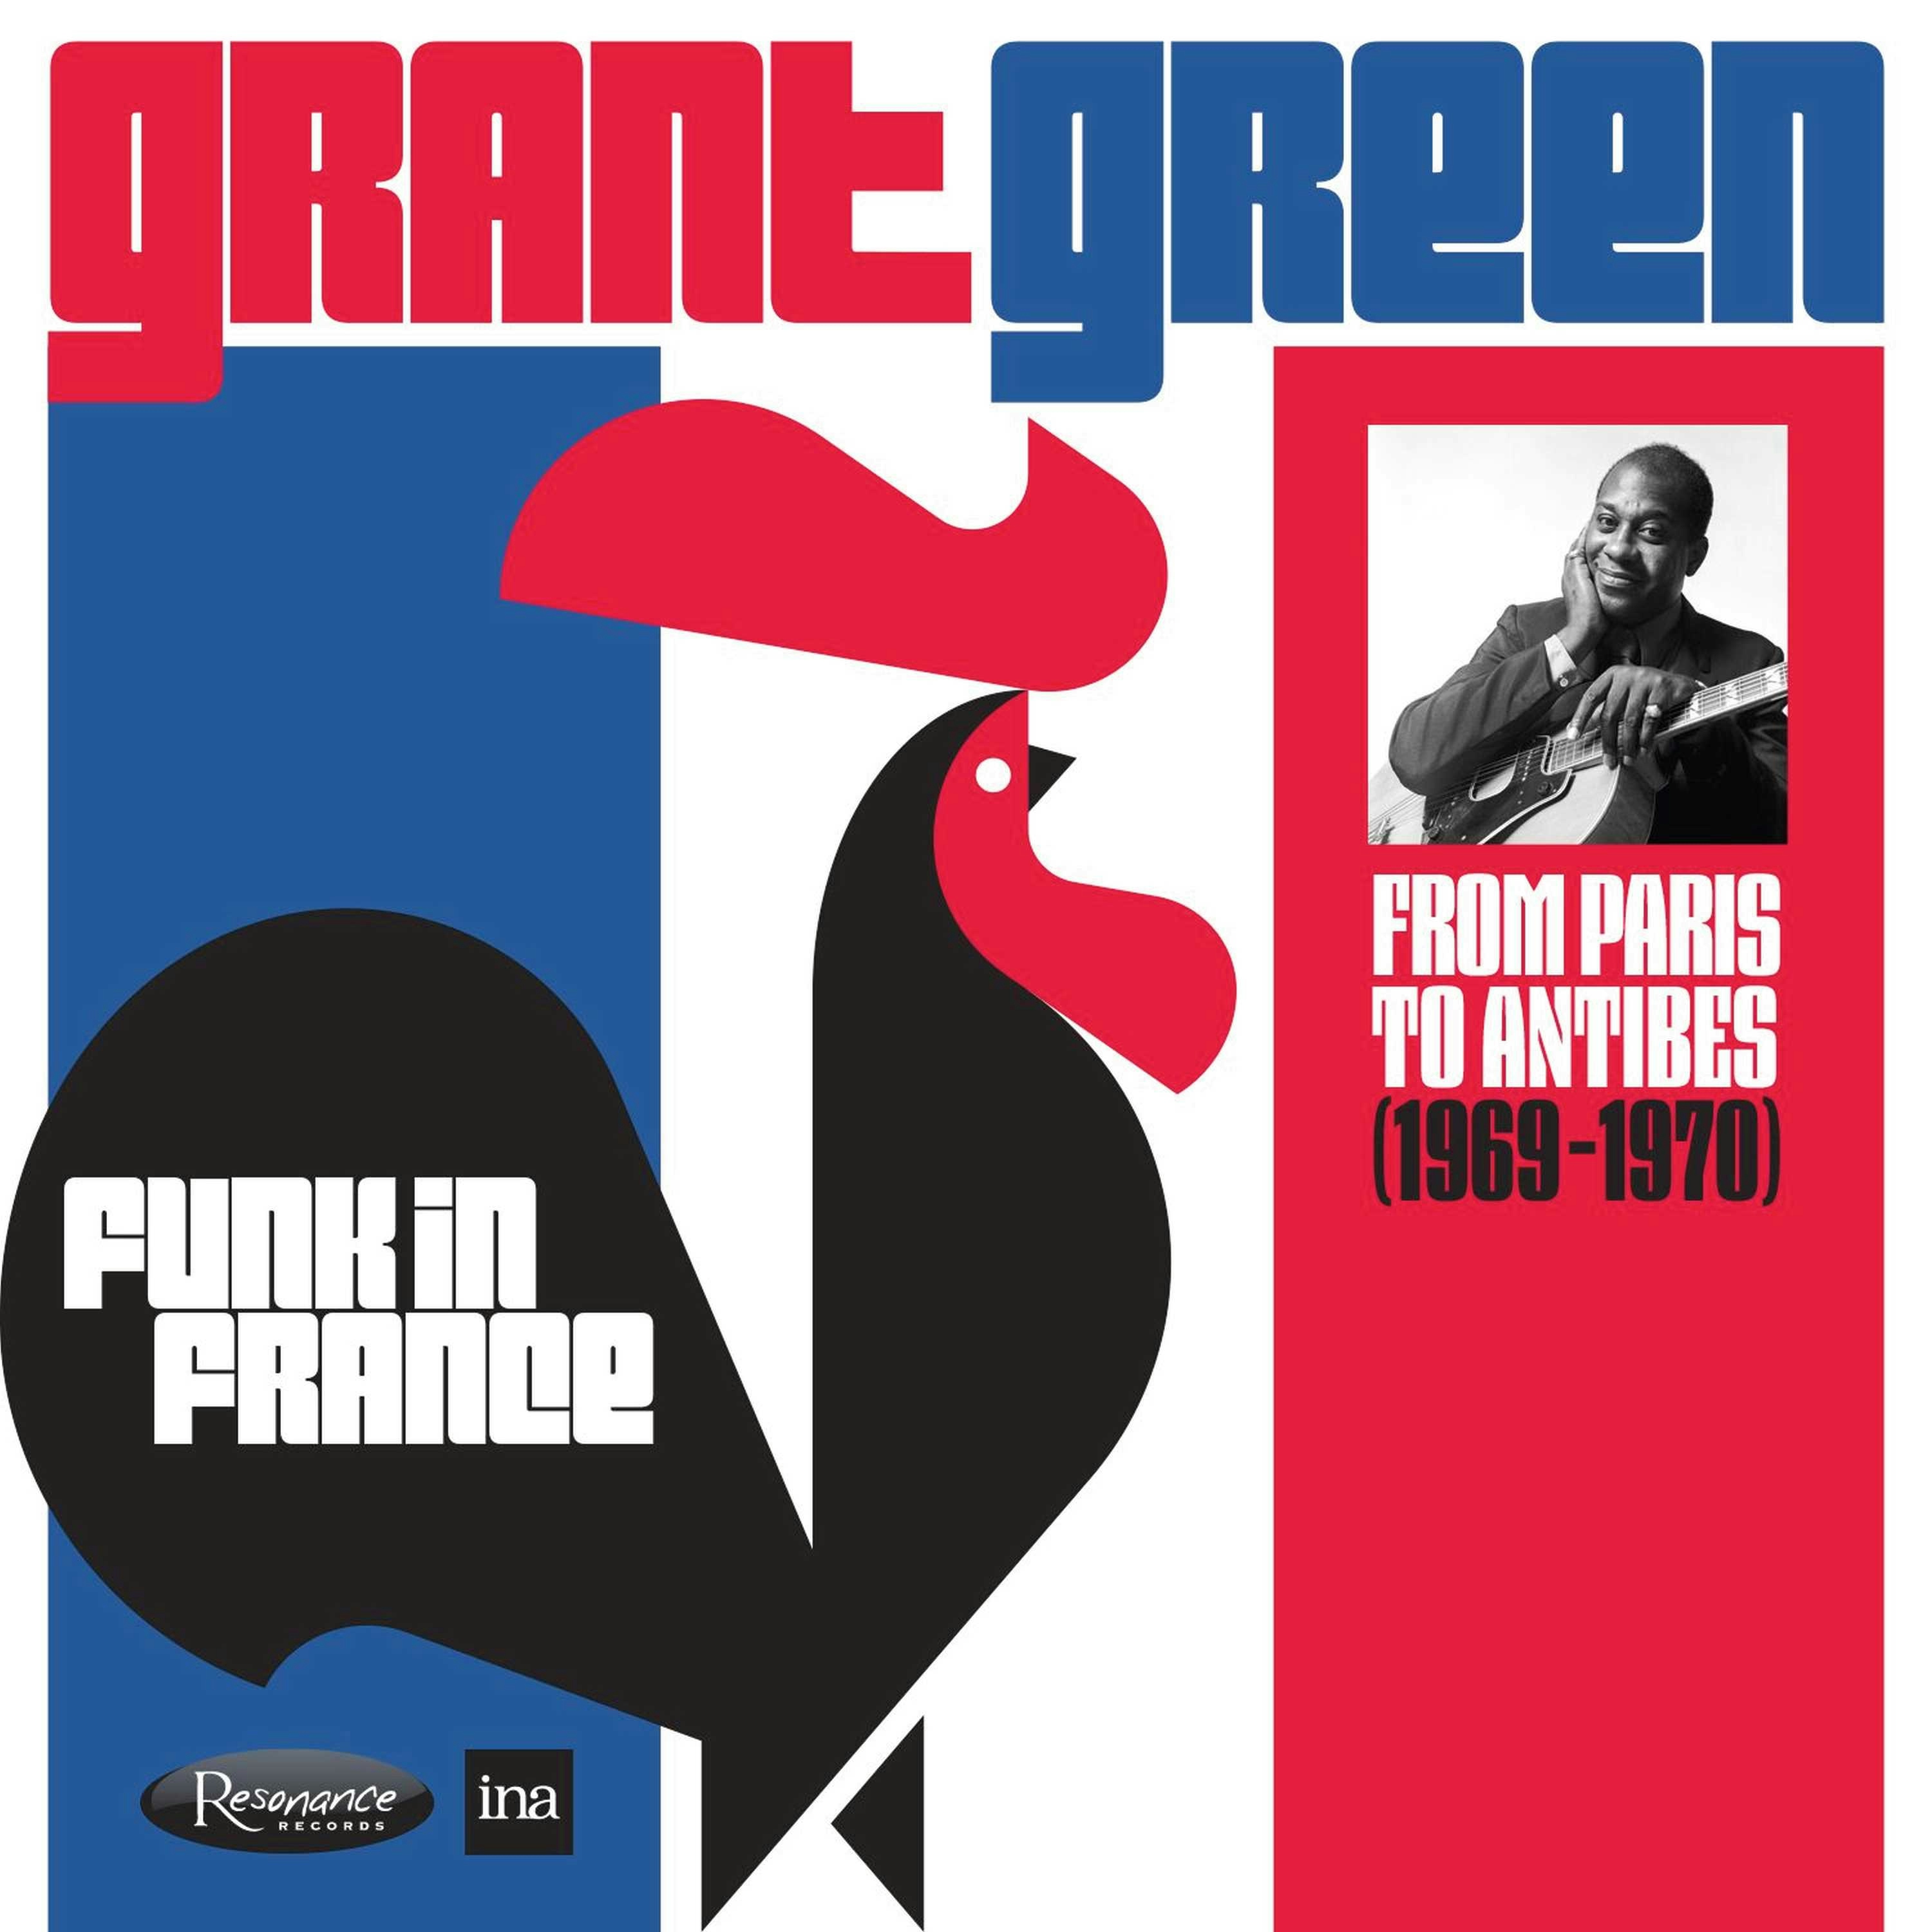 Album artwork for Album artwork for Funk In France - From Paris to Antibes 1969 - 1970 by Grant Green by Funk In France - From Paris to Antibes 1969 - 1970 - Grant Green